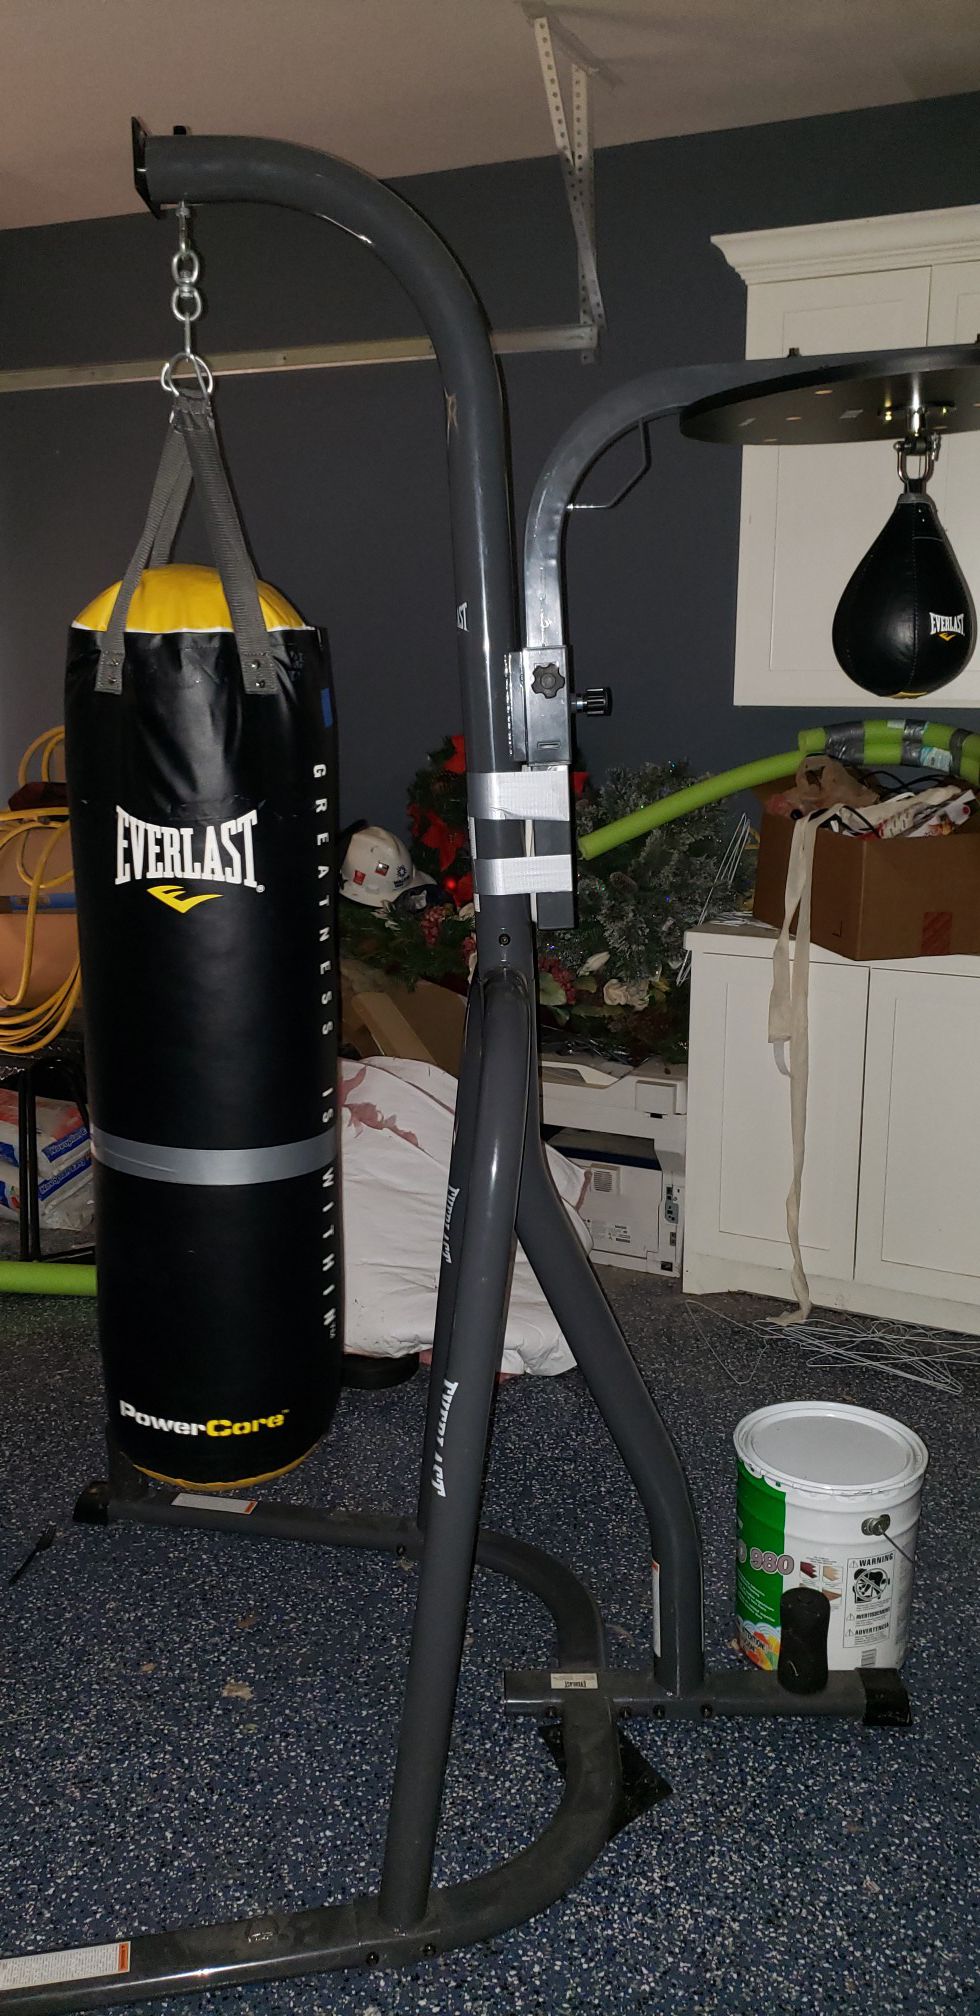 Reflex bag and Dual Station stand with heavy bag and speed bag